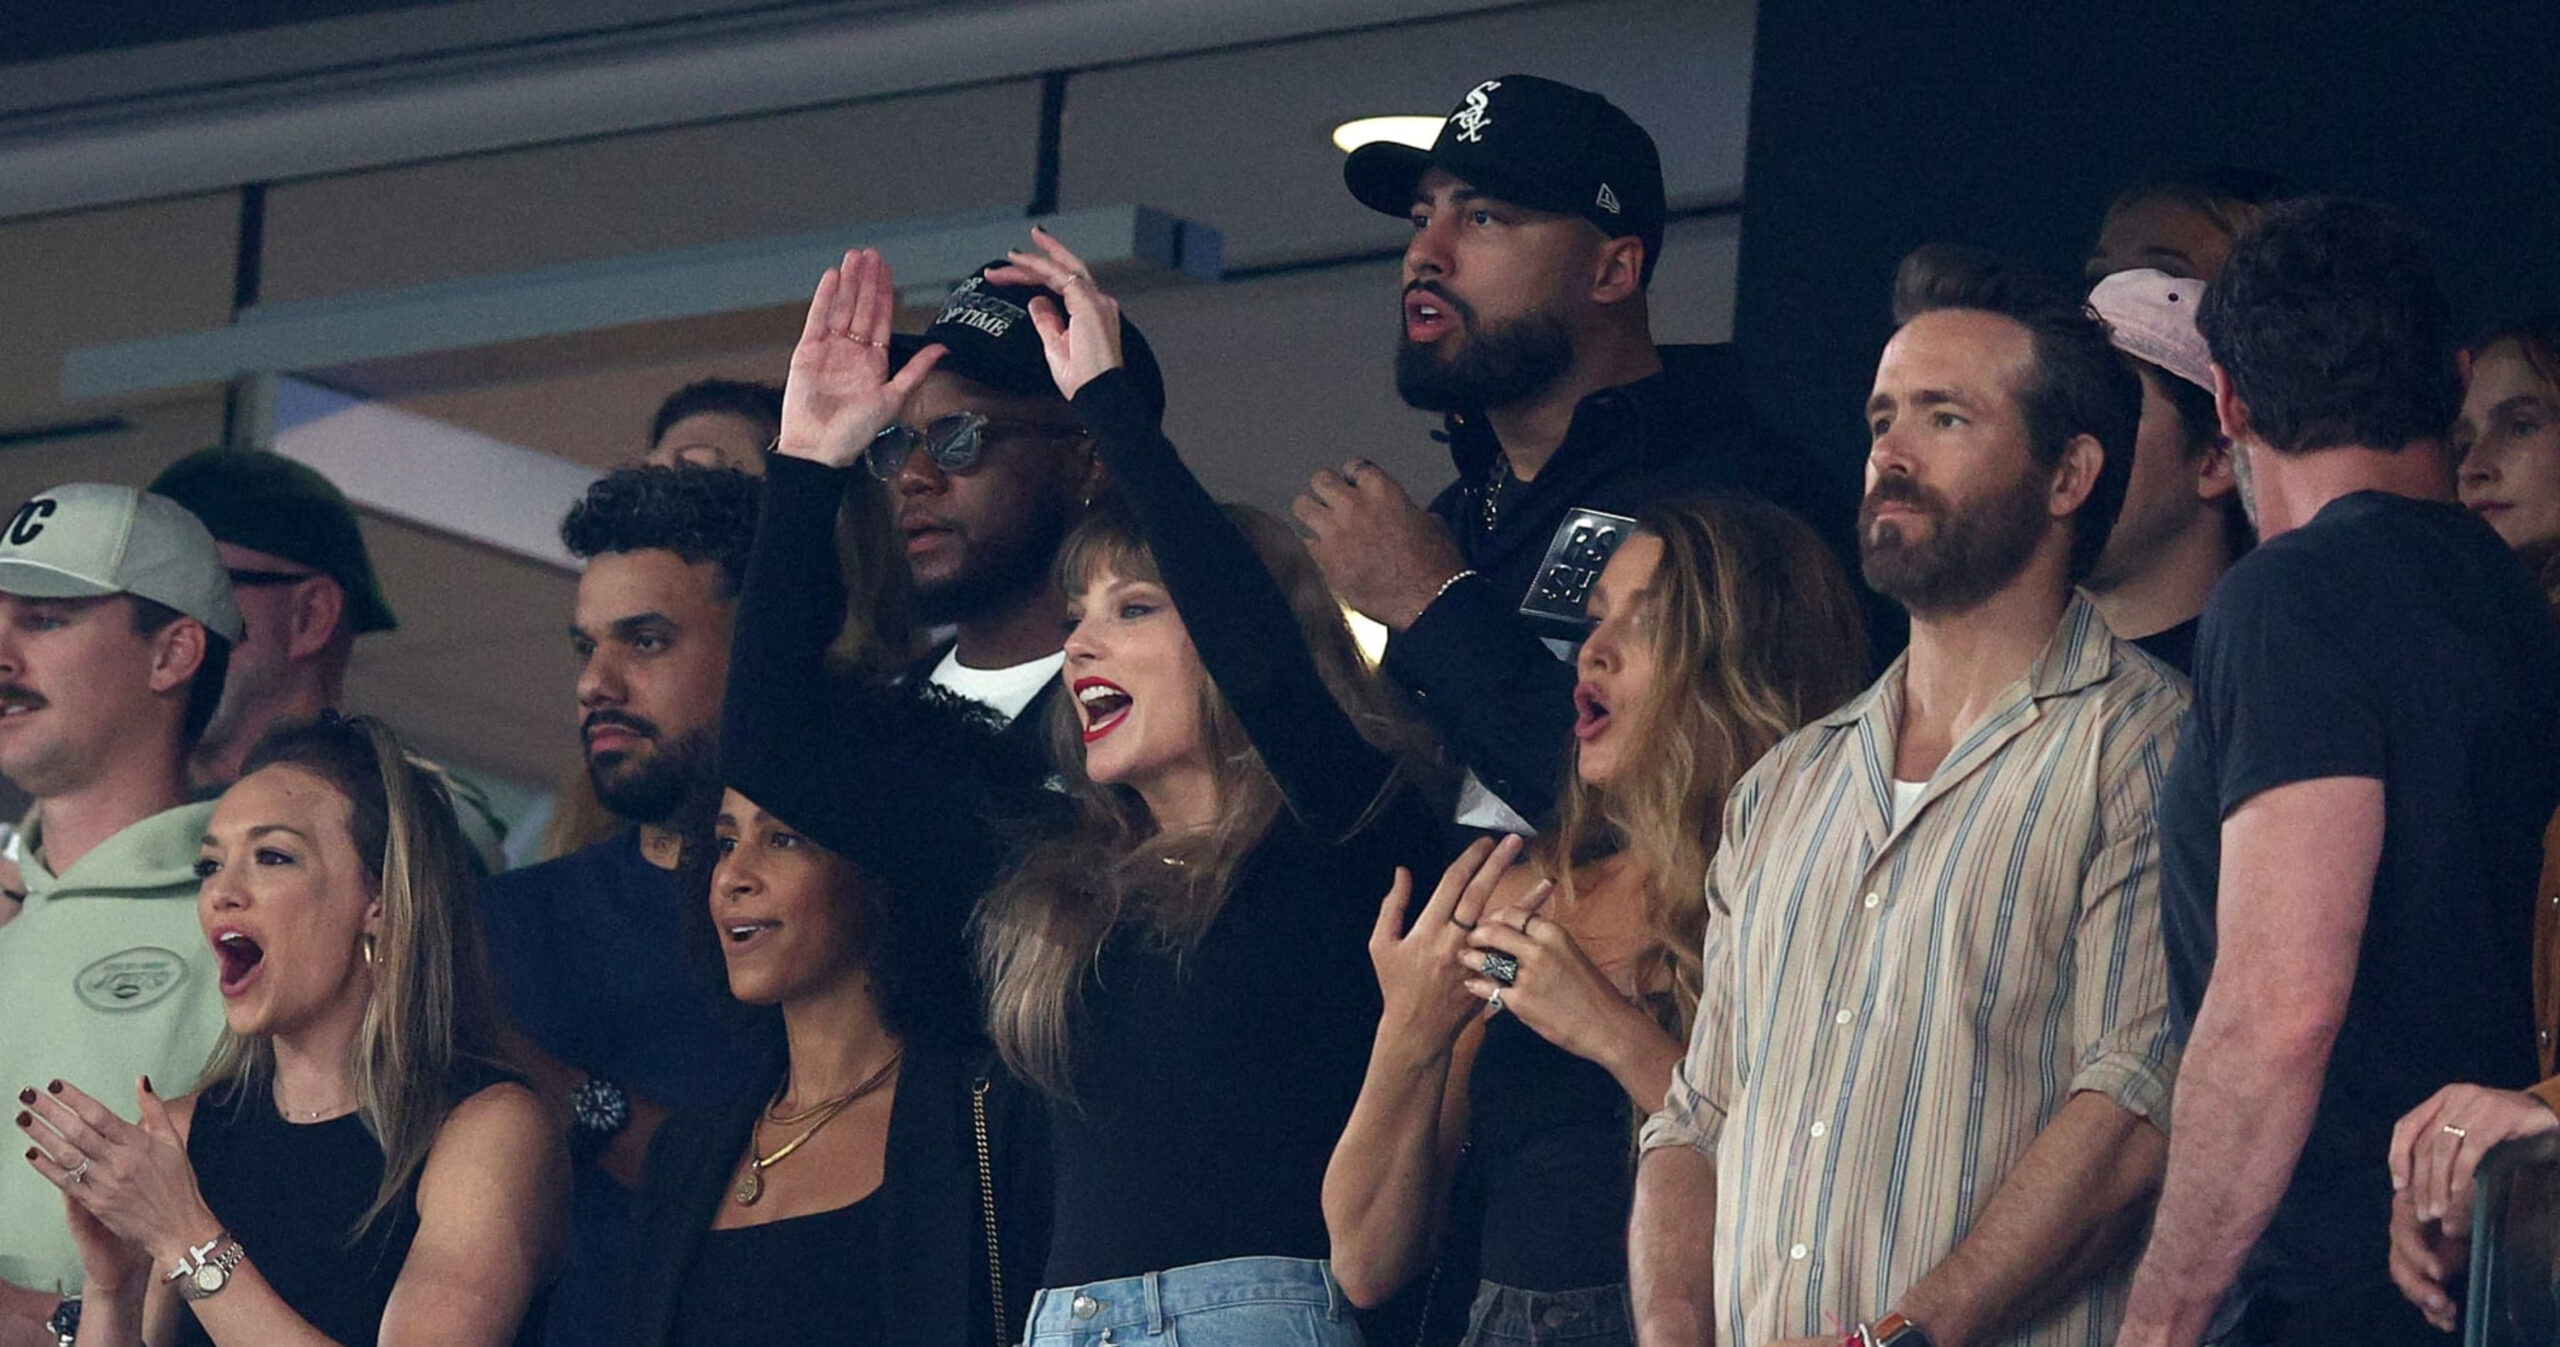 Video: Taylor Swift, Blake Lively Celebrate Isiah Pacheco TD During Chiefs vs. Jets